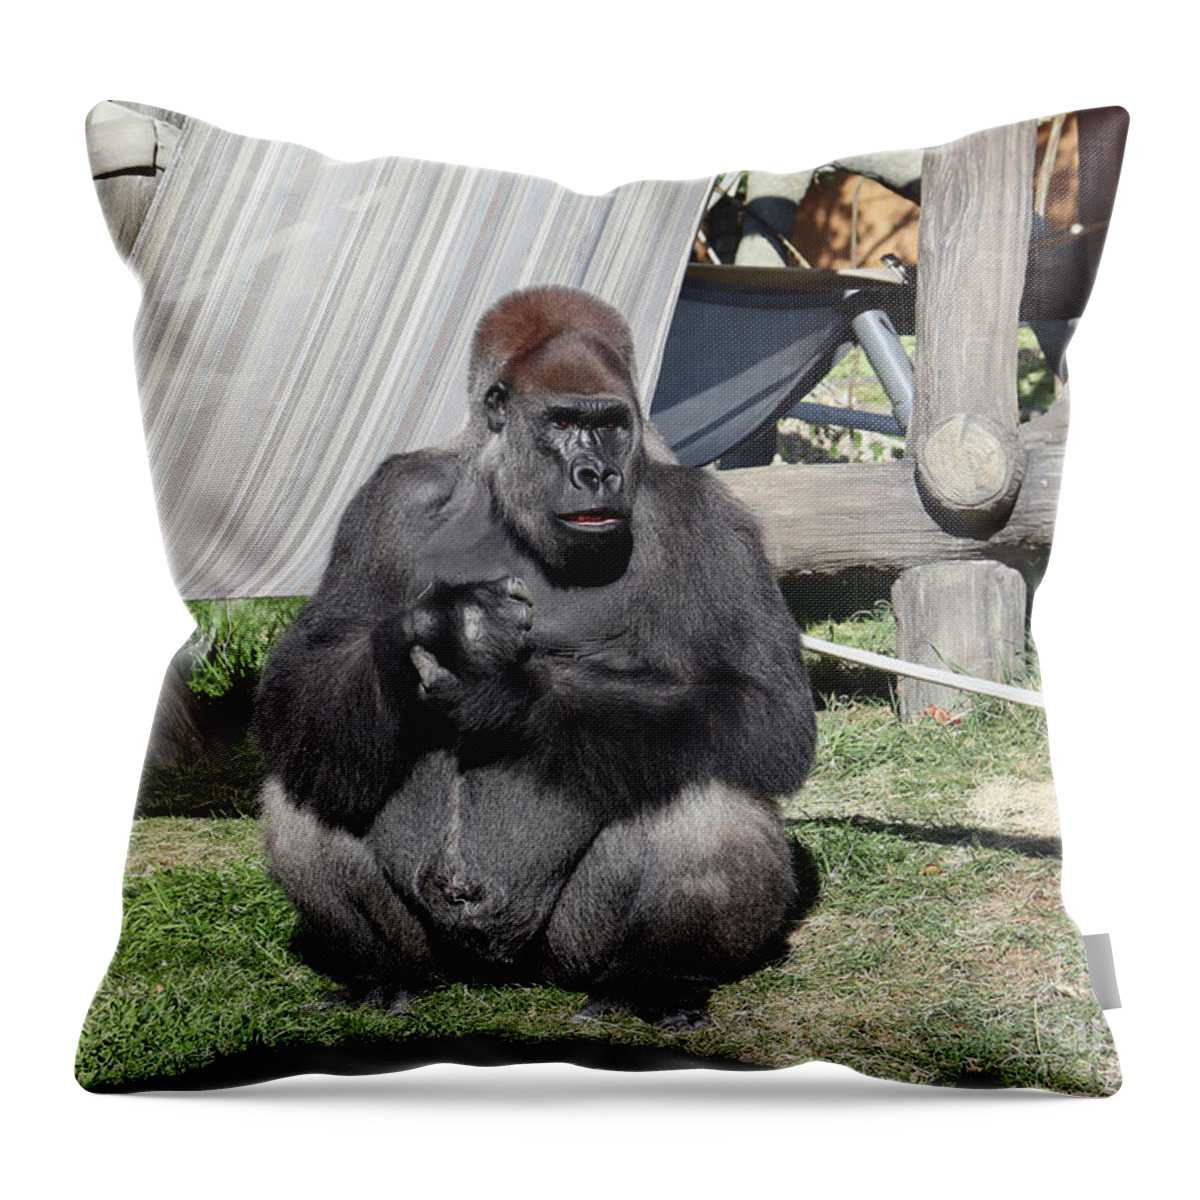 Gorilla Throw Pillow featuring the photograph Silverback 2 by Lisa Mutch